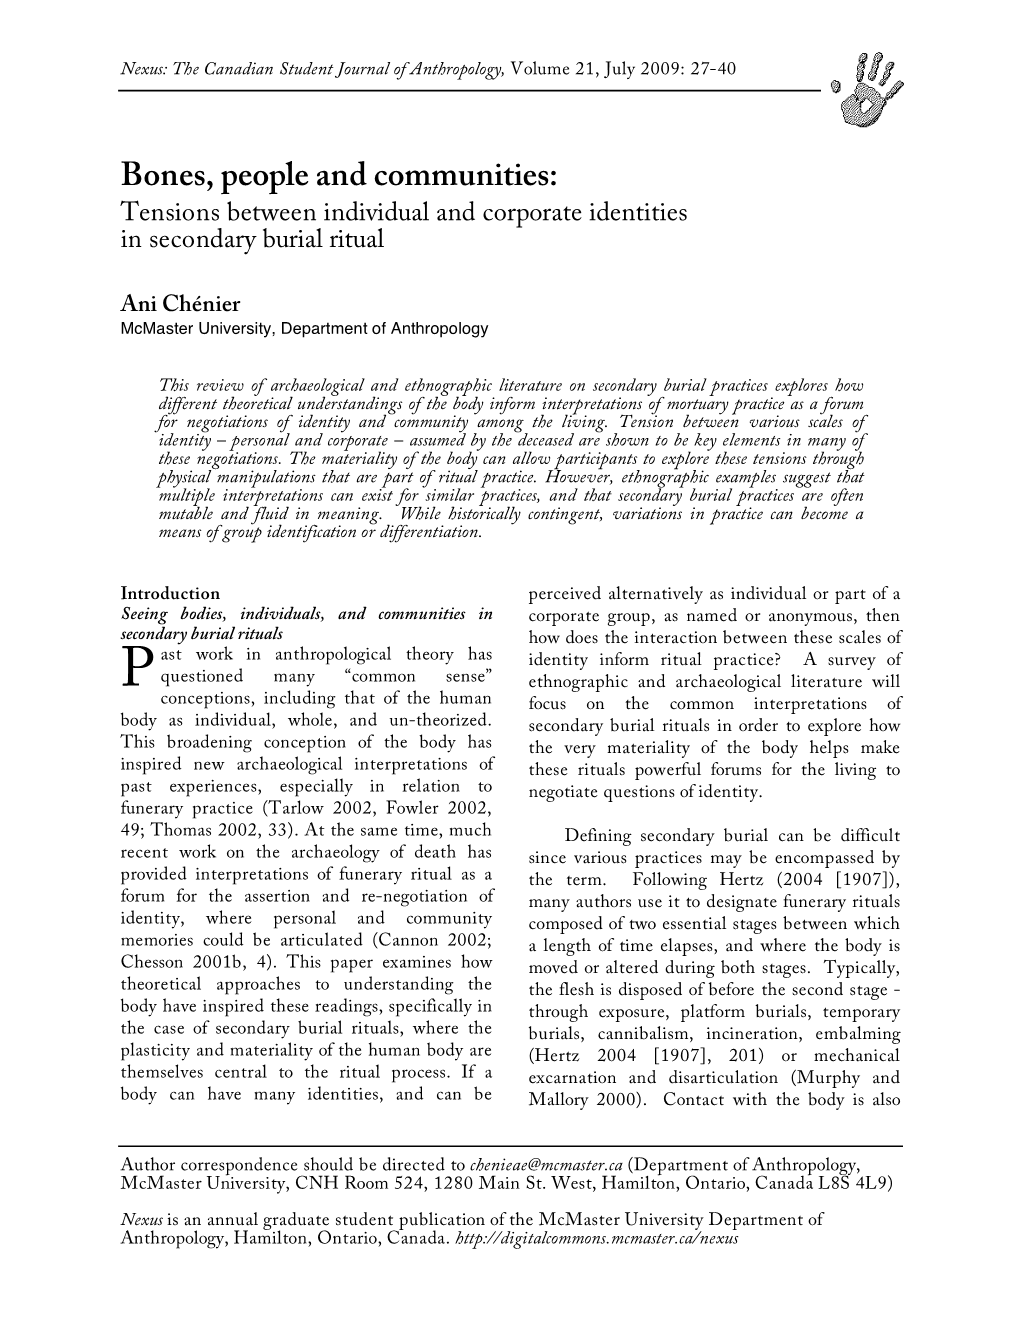 Bones, People and Communities: Tensions Between Individual and Corporate Identities in Secondary Burial Ritual